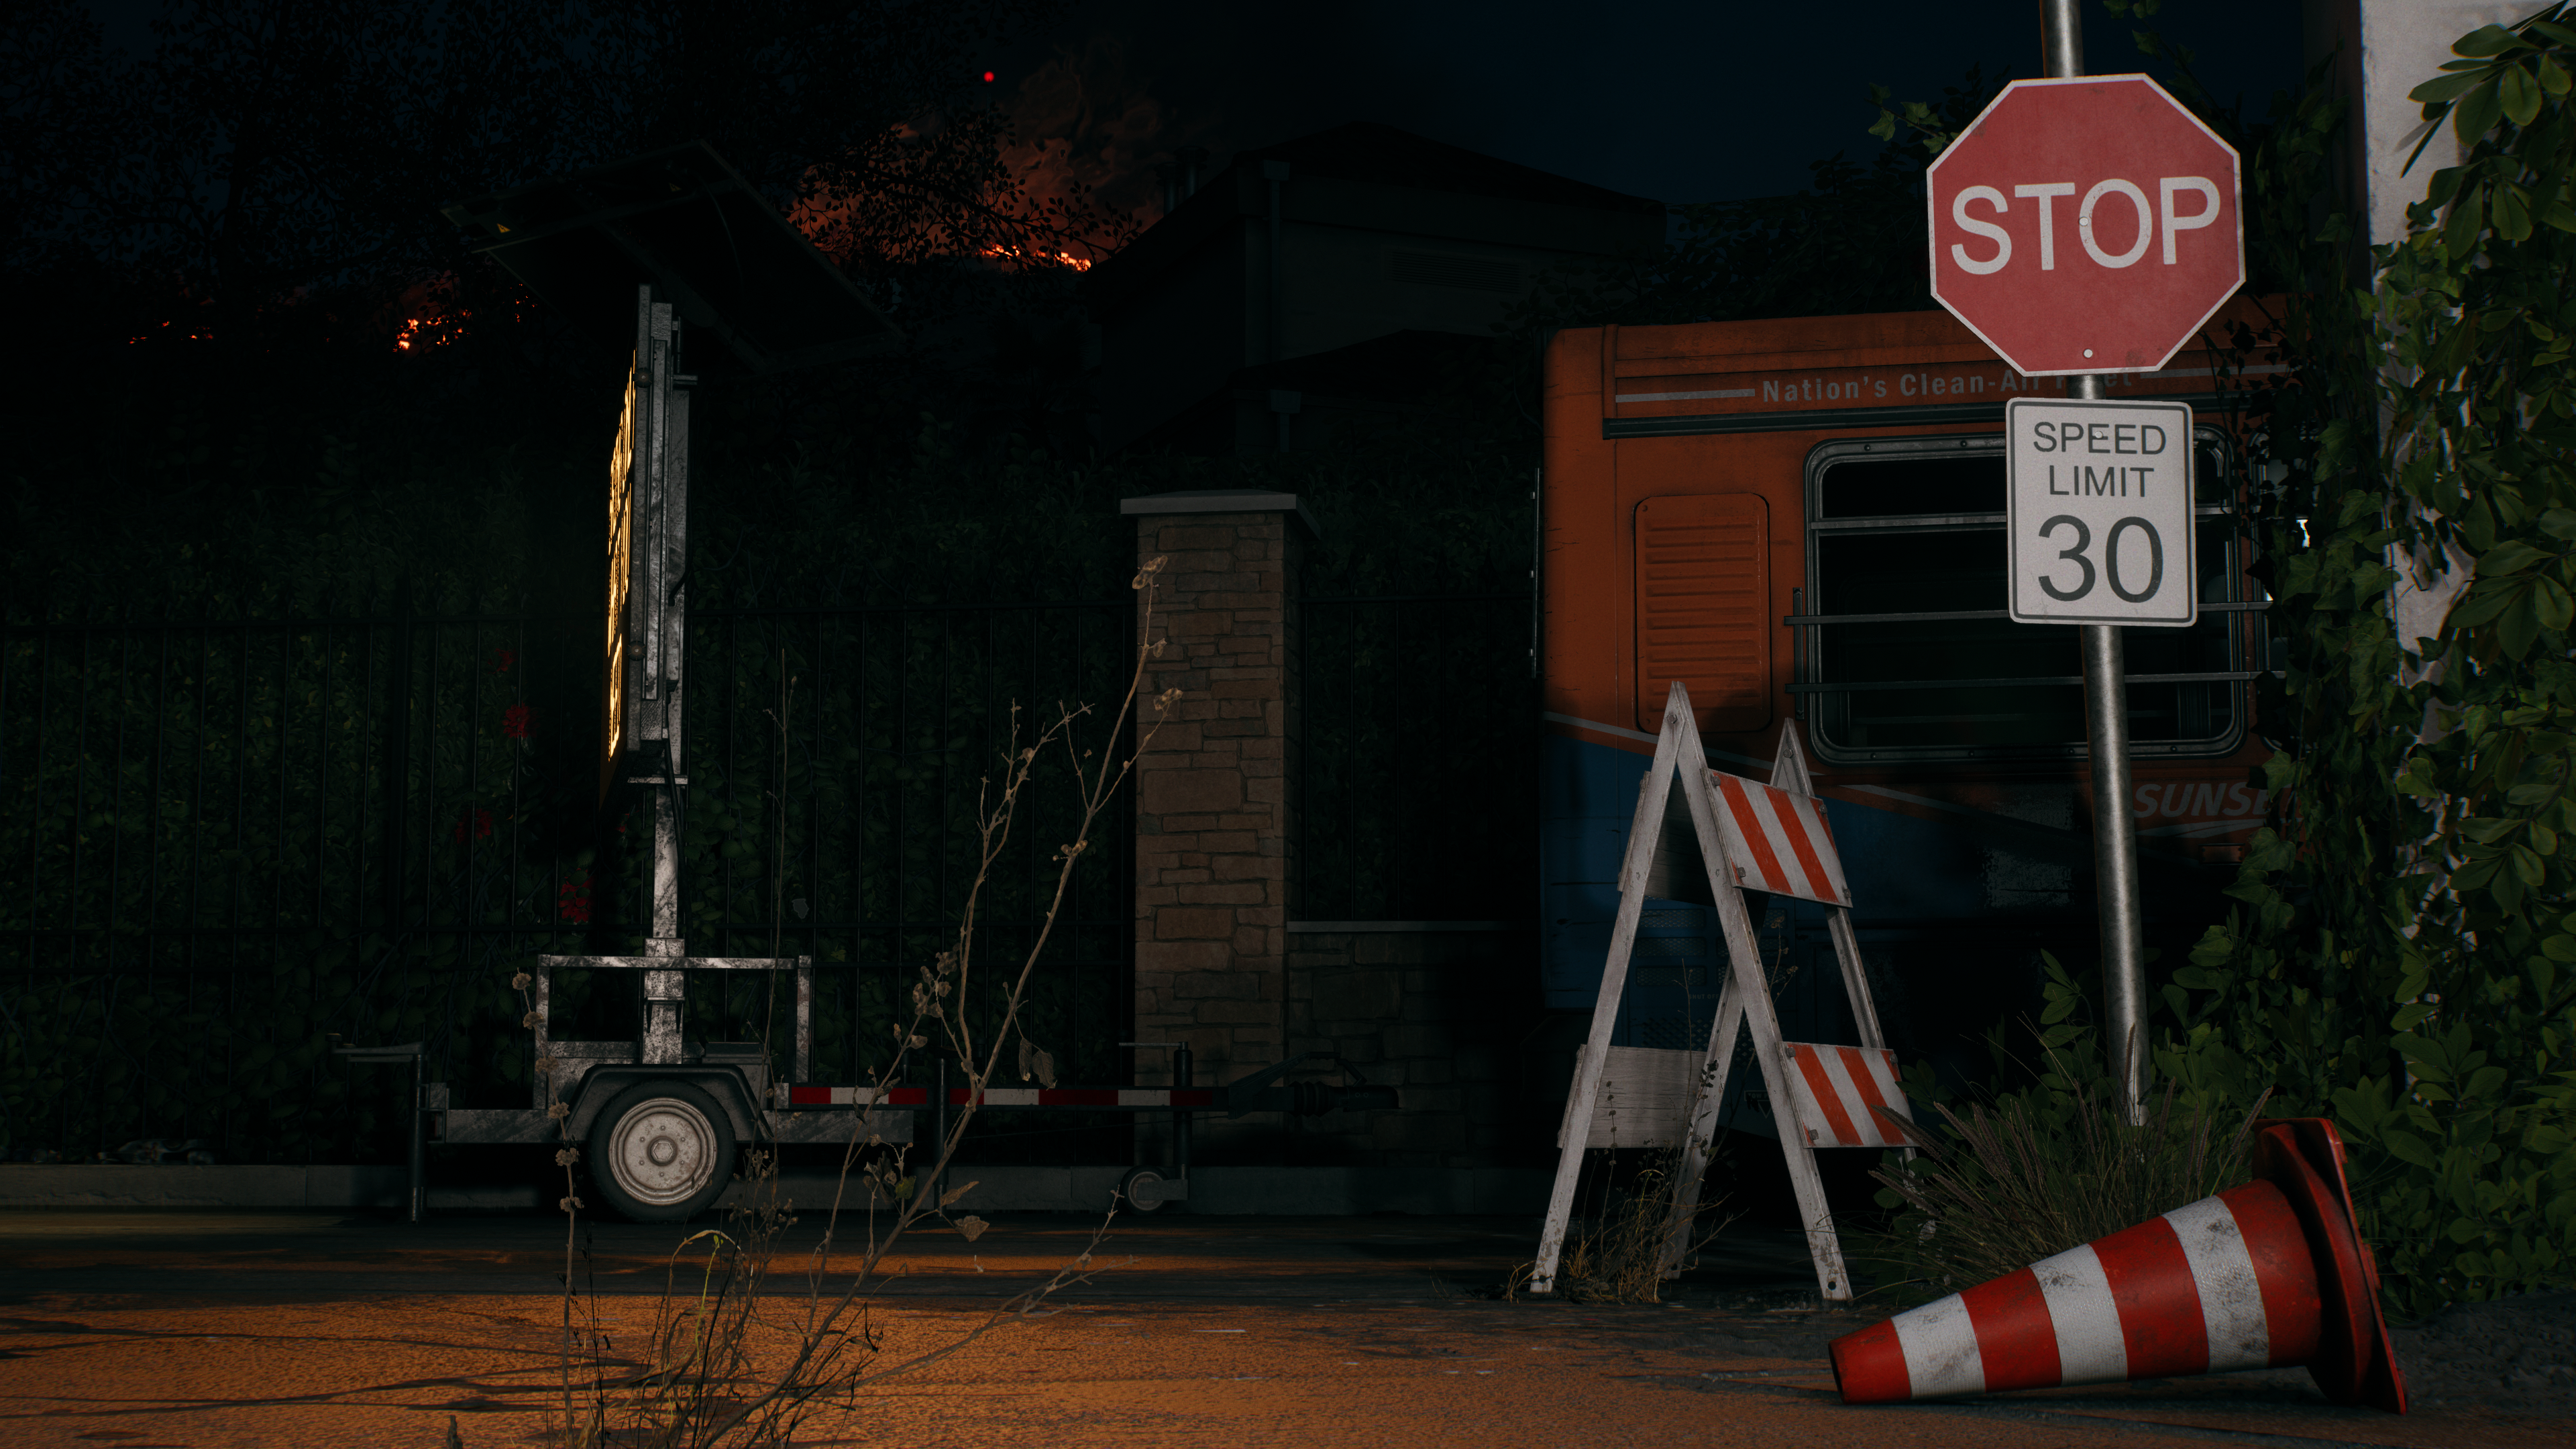 General 3840x2160 Dead Island 2 Nvidia RTX video games CGI sign stop sign night traffic cone leaves